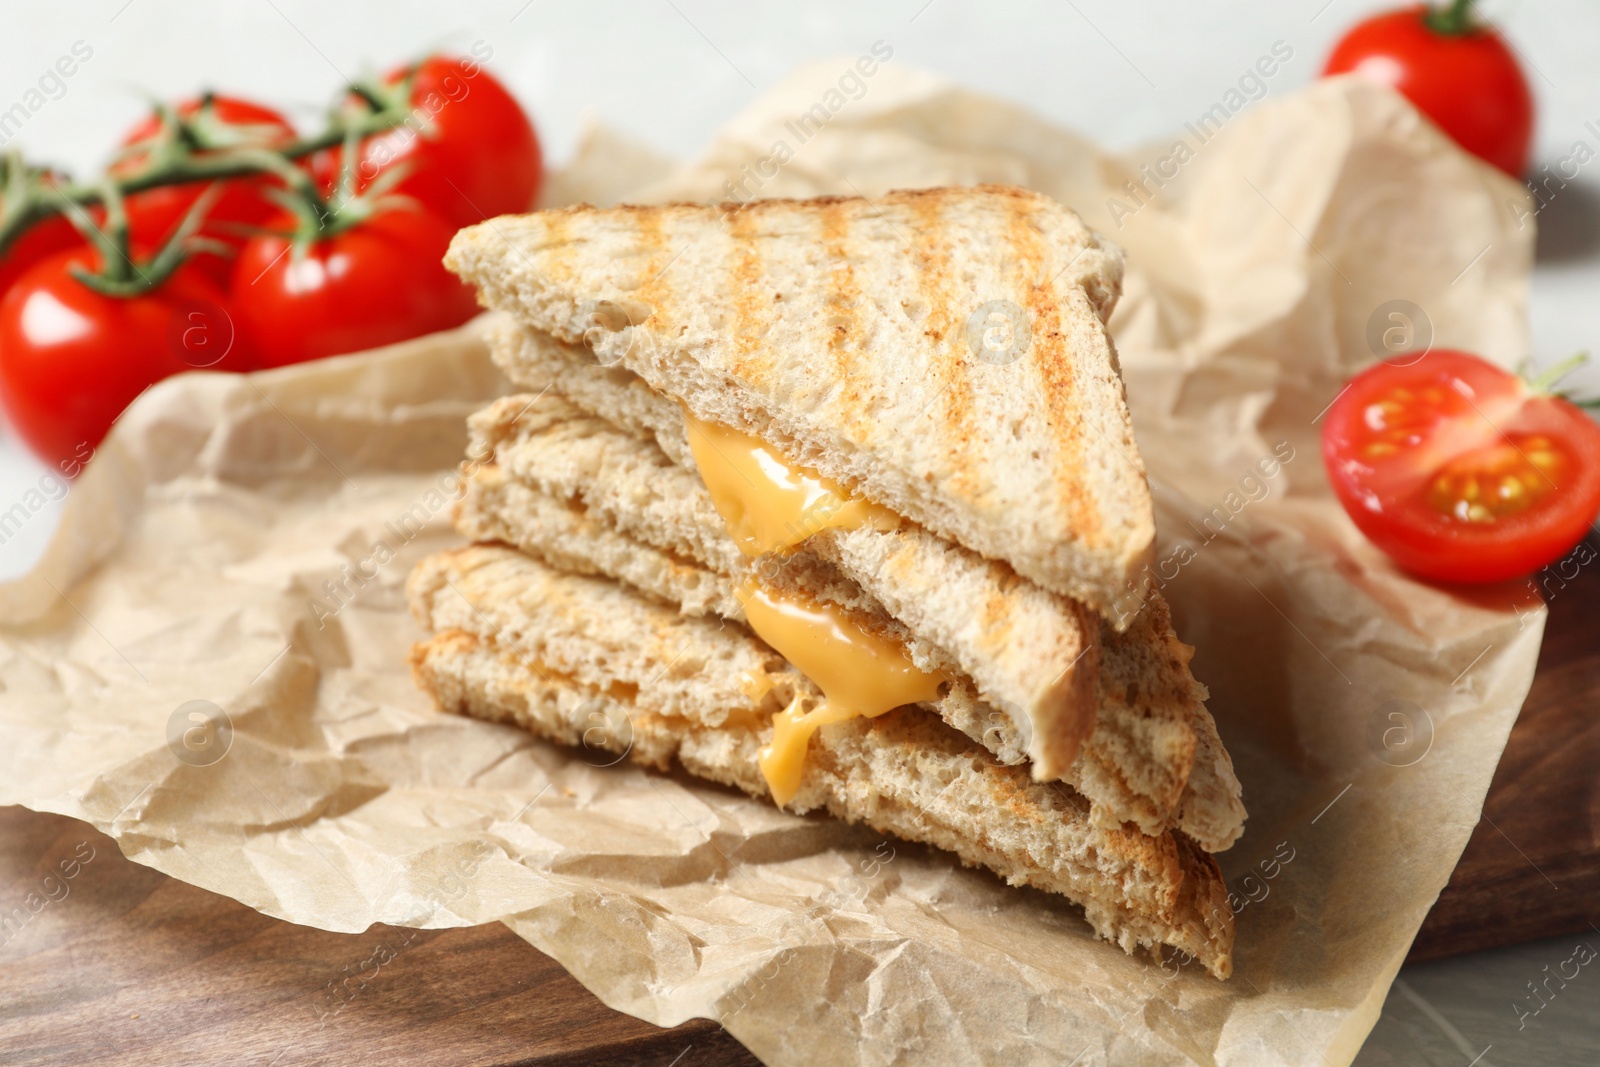 Image of Tasty toast sandwiches with cheese and tomatoes on wooden board, closeup